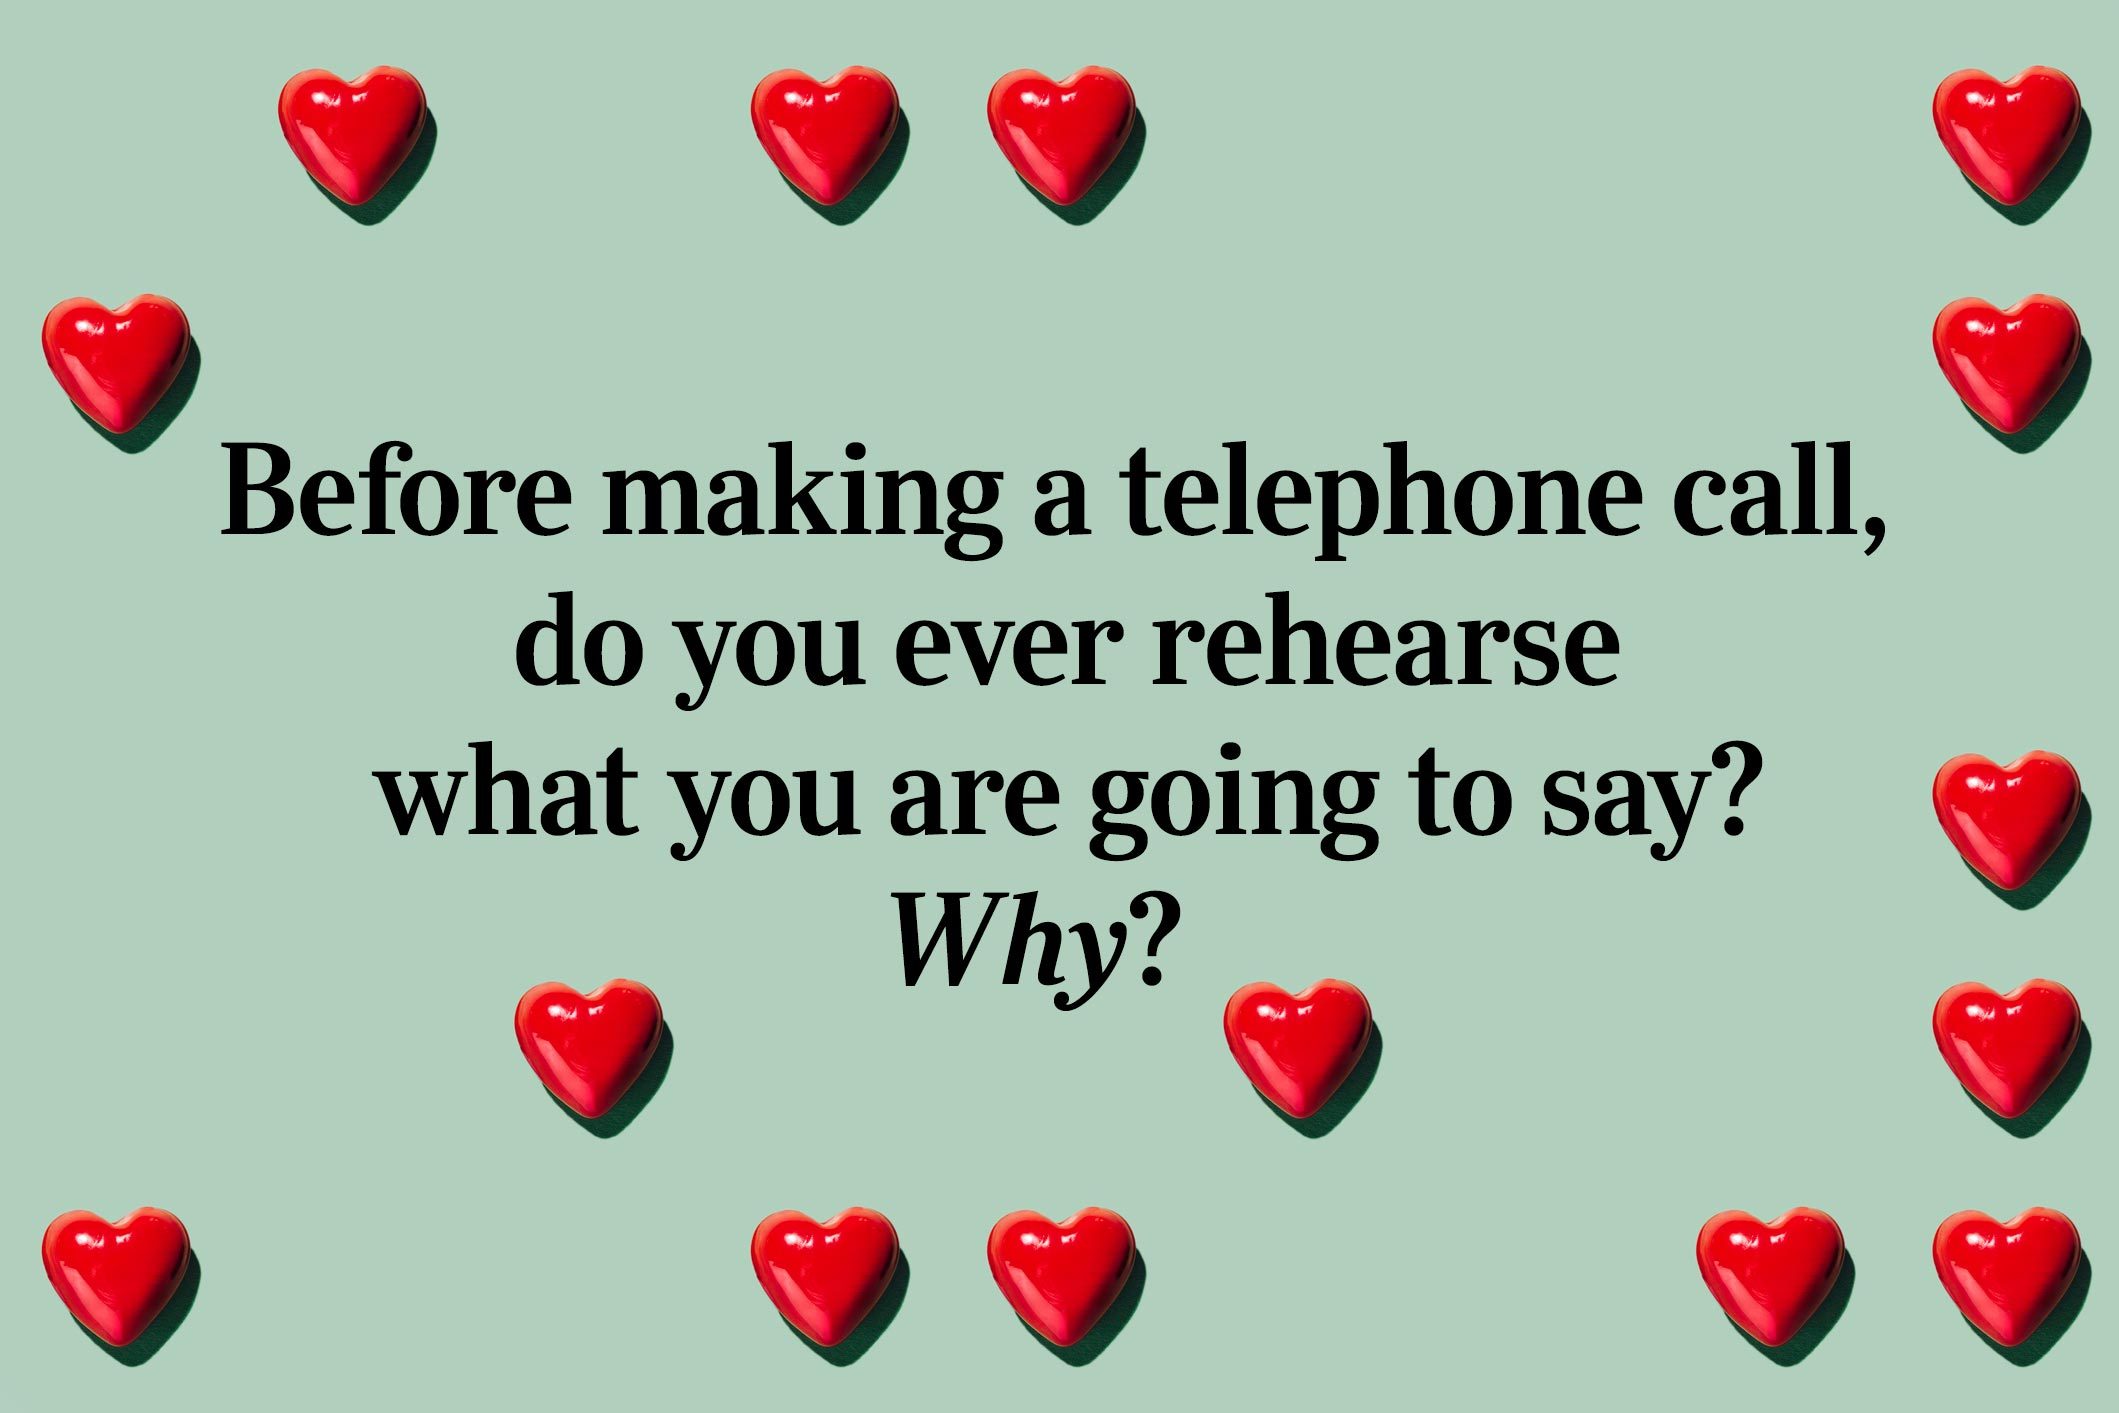 <p>Before making a telephone call, do you ever rehearse what you are going to say? Why?</p> <p>No judgment if you've done this while making a reservation at a <a href="https://www.rd.com/list/romantic-restaurant-valentines-day-every-state/">romantic Valentine's Day restaurant</a>.</p>